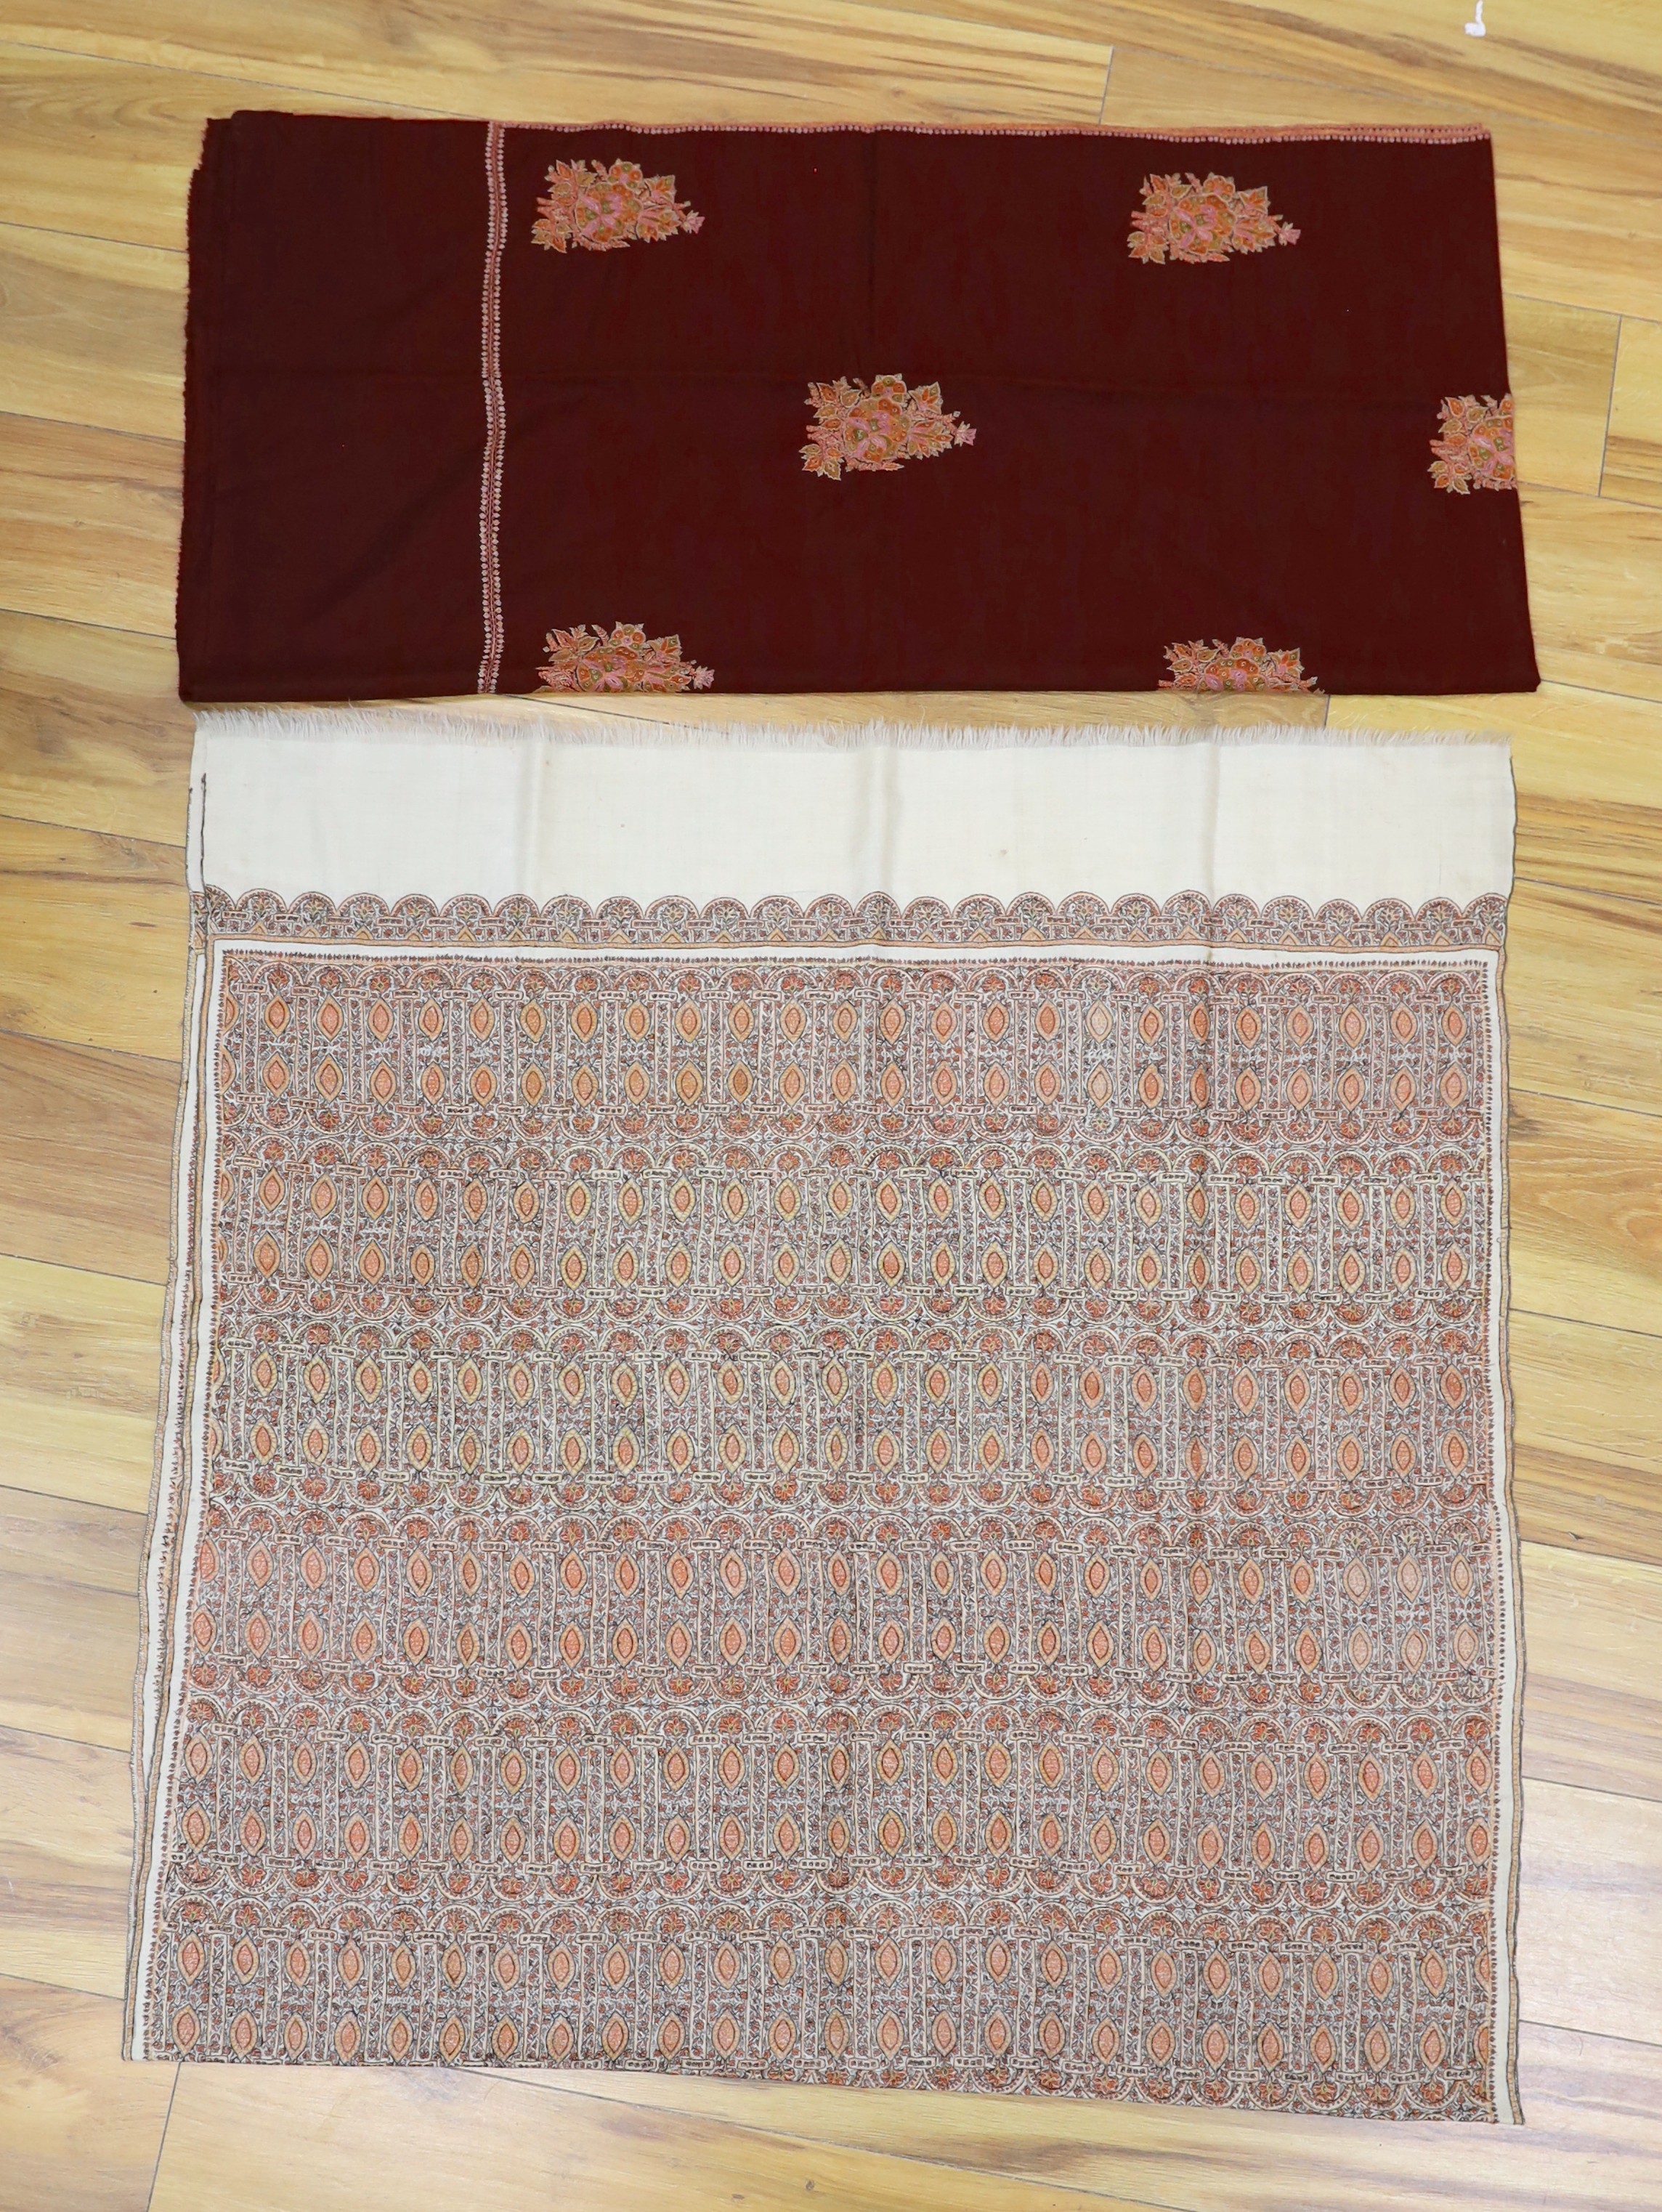 An Indian 20th century pashmina silk embroidered shawl and a cashmere wool shawl with spot motif embroidery